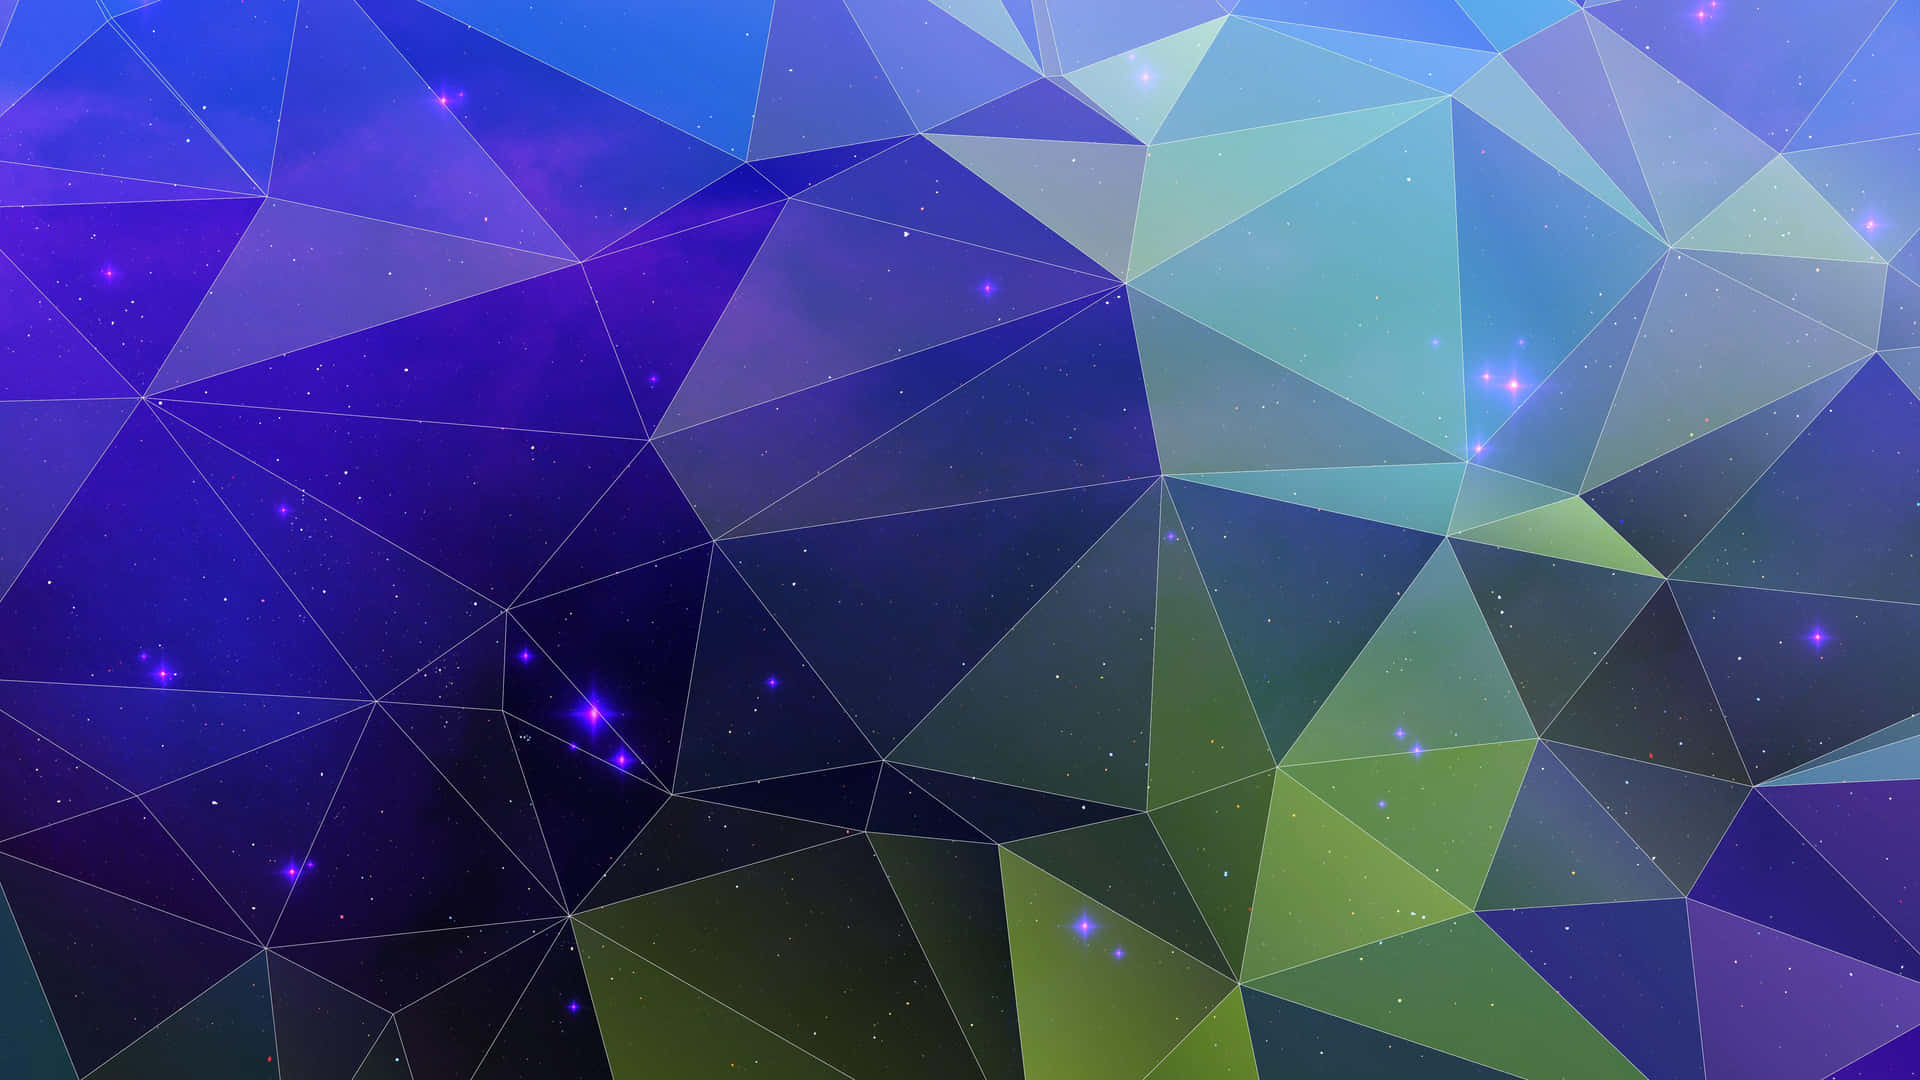 Geometric shapes come alive in this triangle background